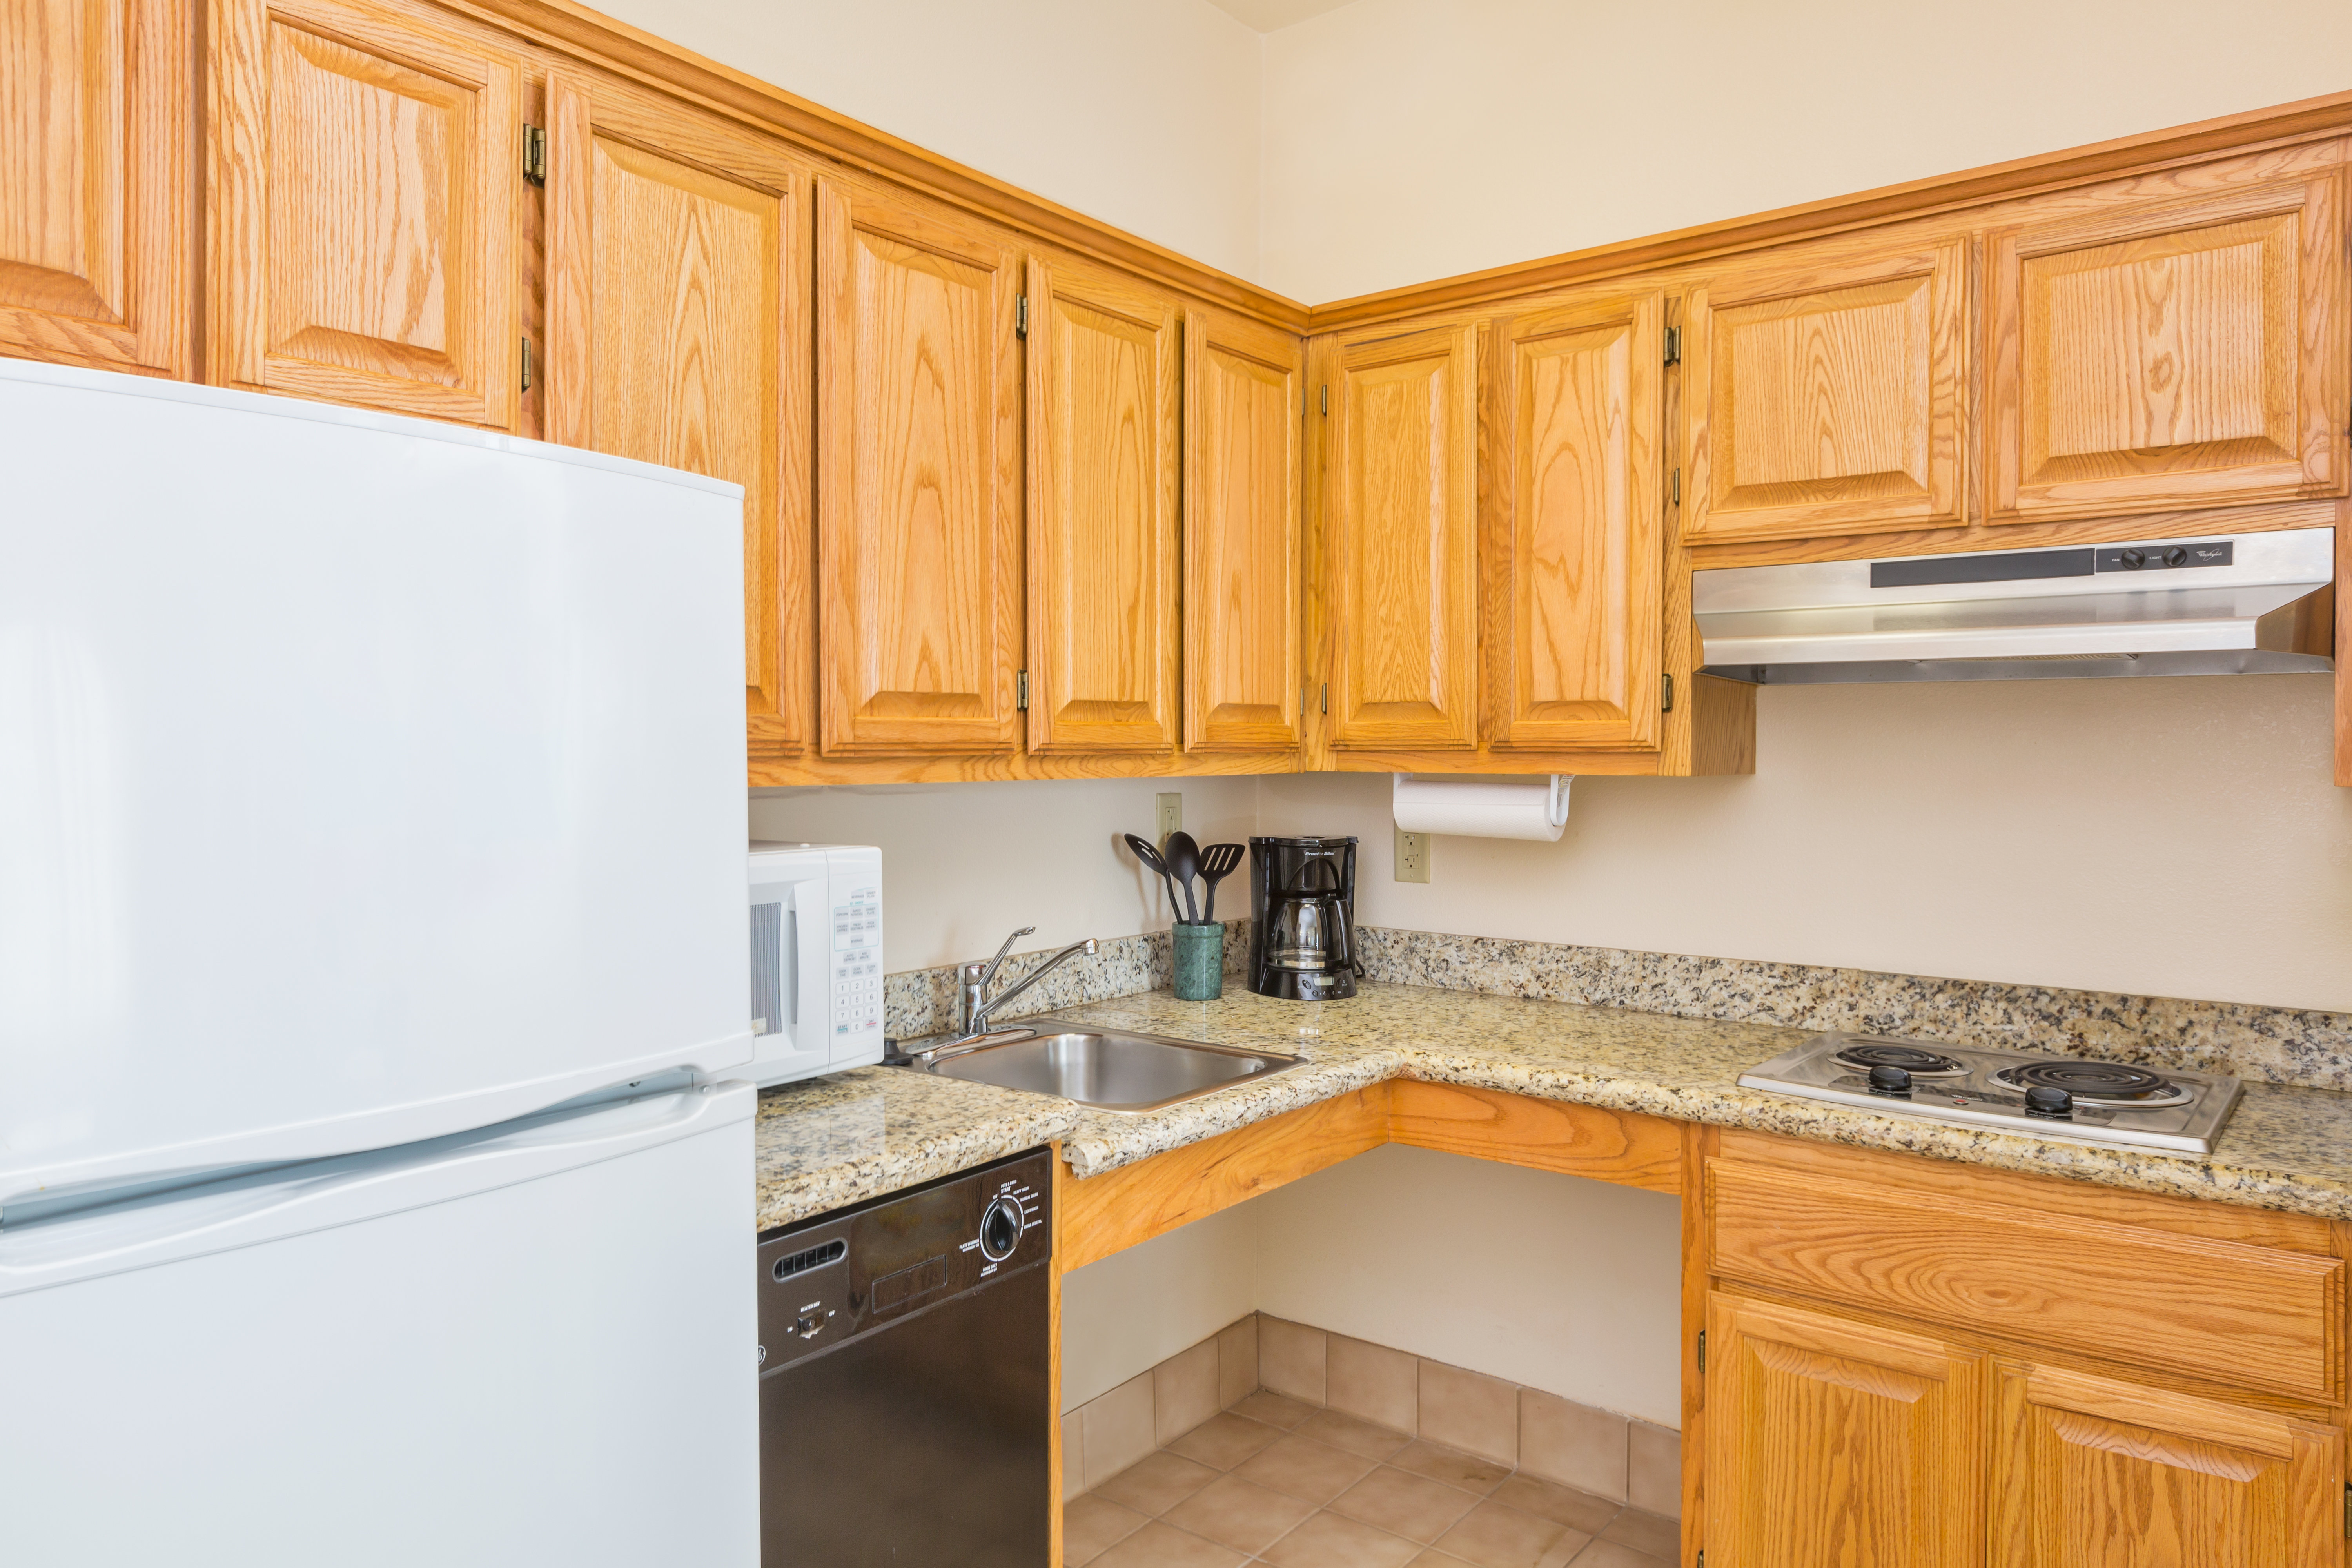 ADA/Handicapped accessible kitchen